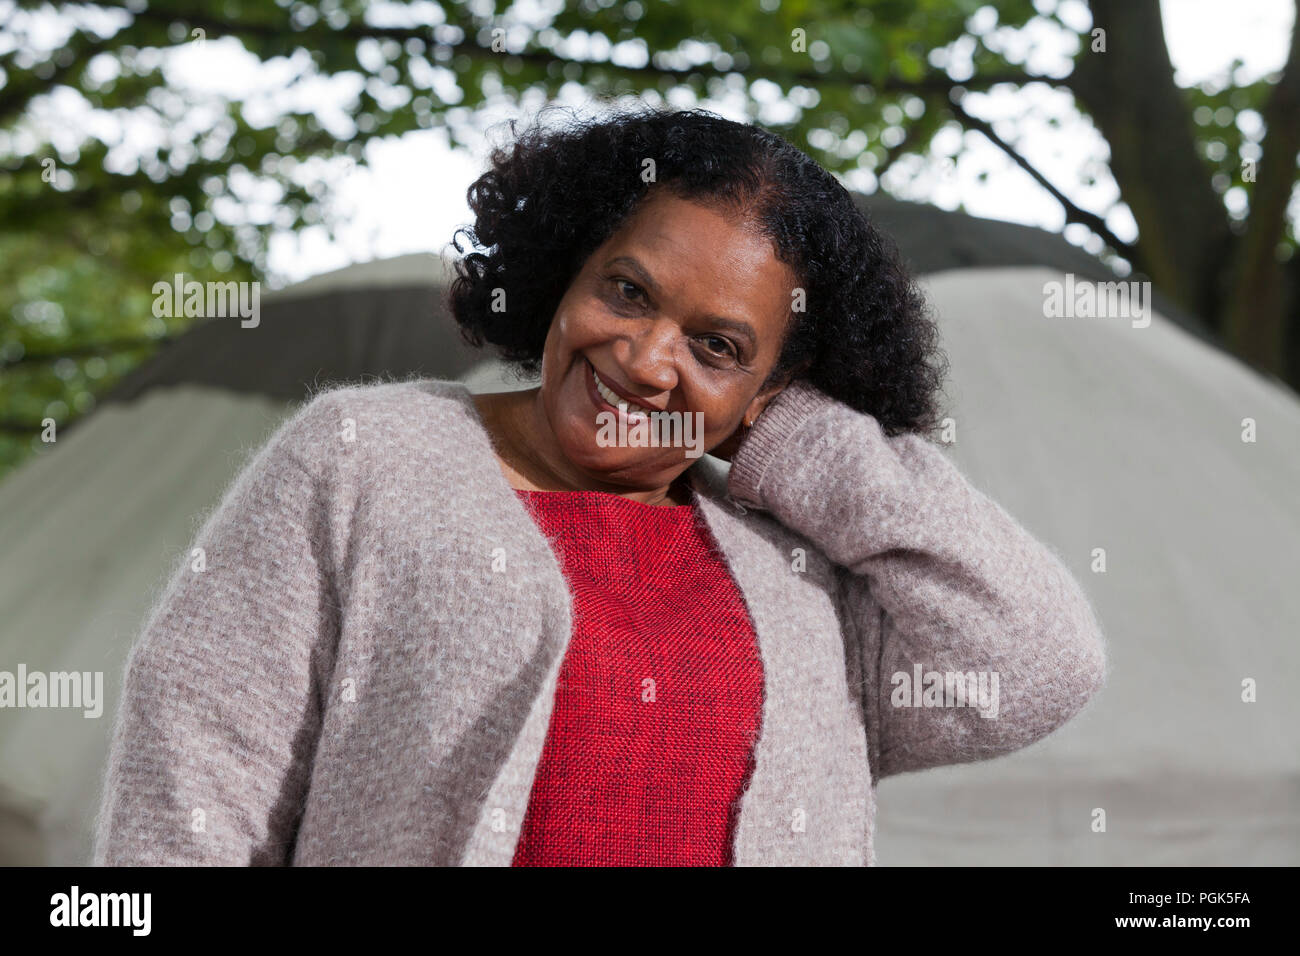 Edinburgh, UK. 27th August, 2018. Lorna Goodison CD is a Jamaican poet, a leading West Indian writer of the generation born after World War II. Pictured at the Edinburgh International Book Festival. Edinburgh, Scotland.  Picture by Gary Doak / Alamy Live News Stock Photo